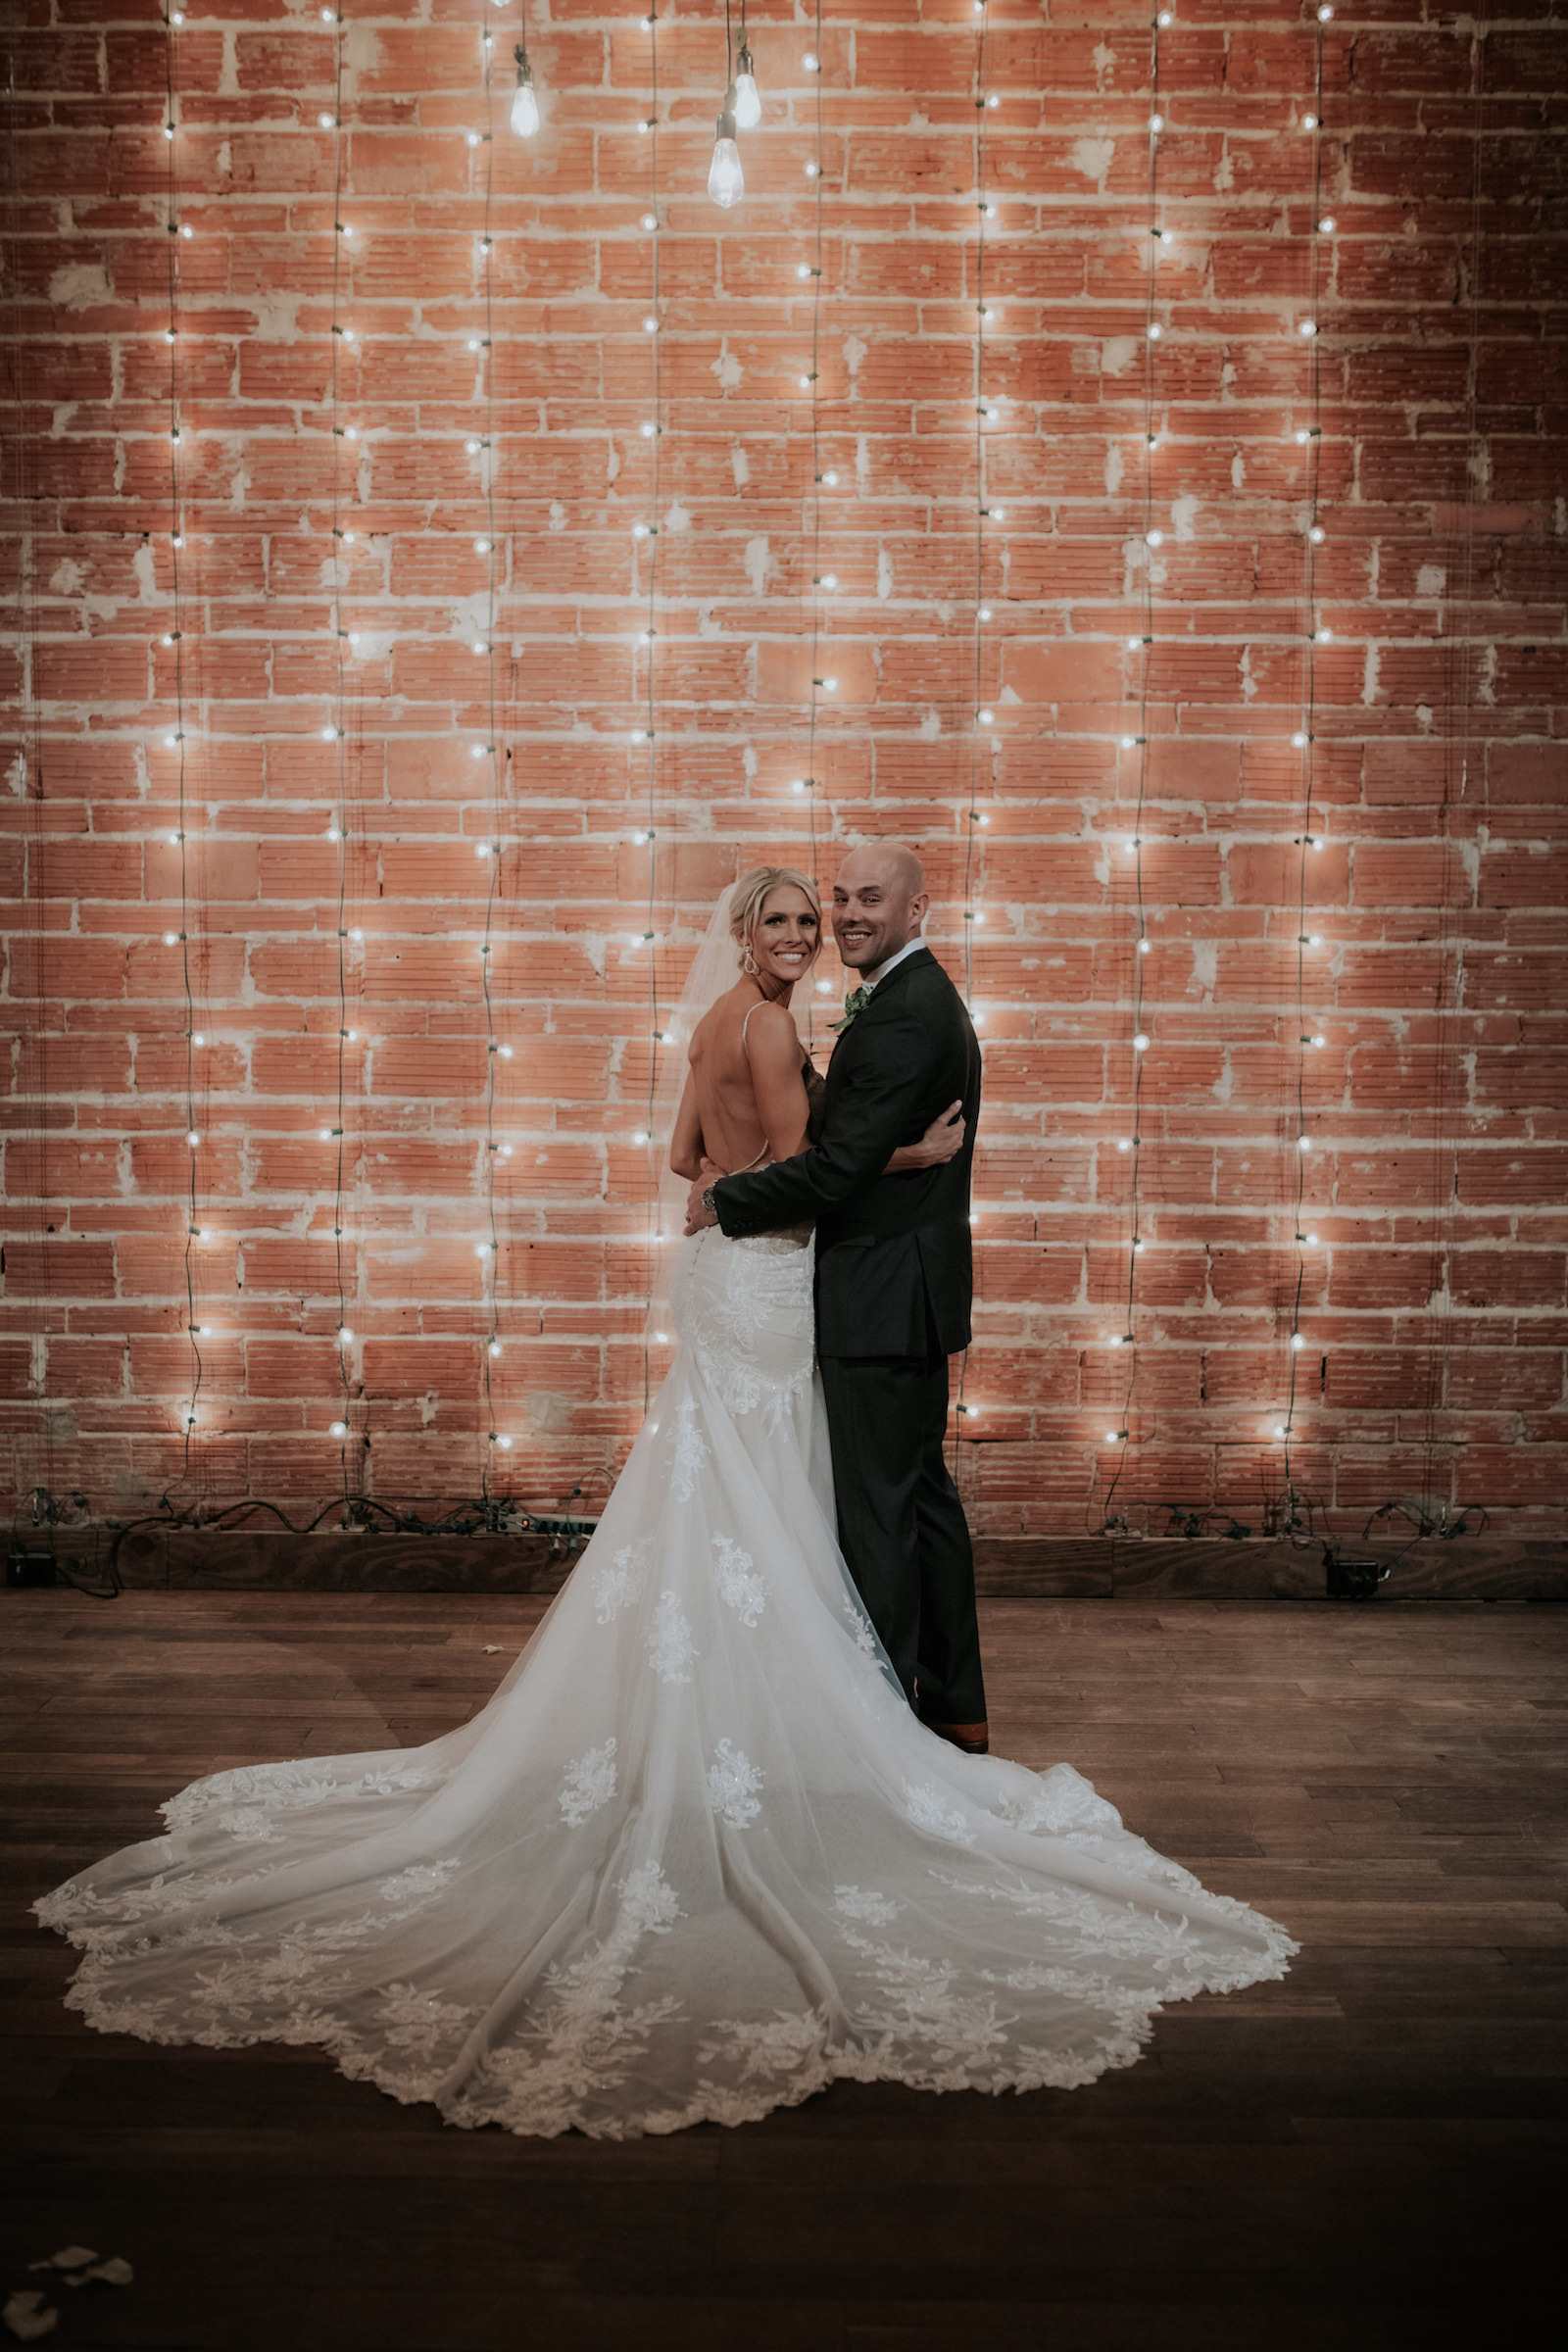 Tampa Bay Bride and Groom Wedding Portrait in Front of Exposed Red Brick Wall and Romantic String Lighting | Unique Florida Wedding Venue NOVA 535 in Downtown St. Pete